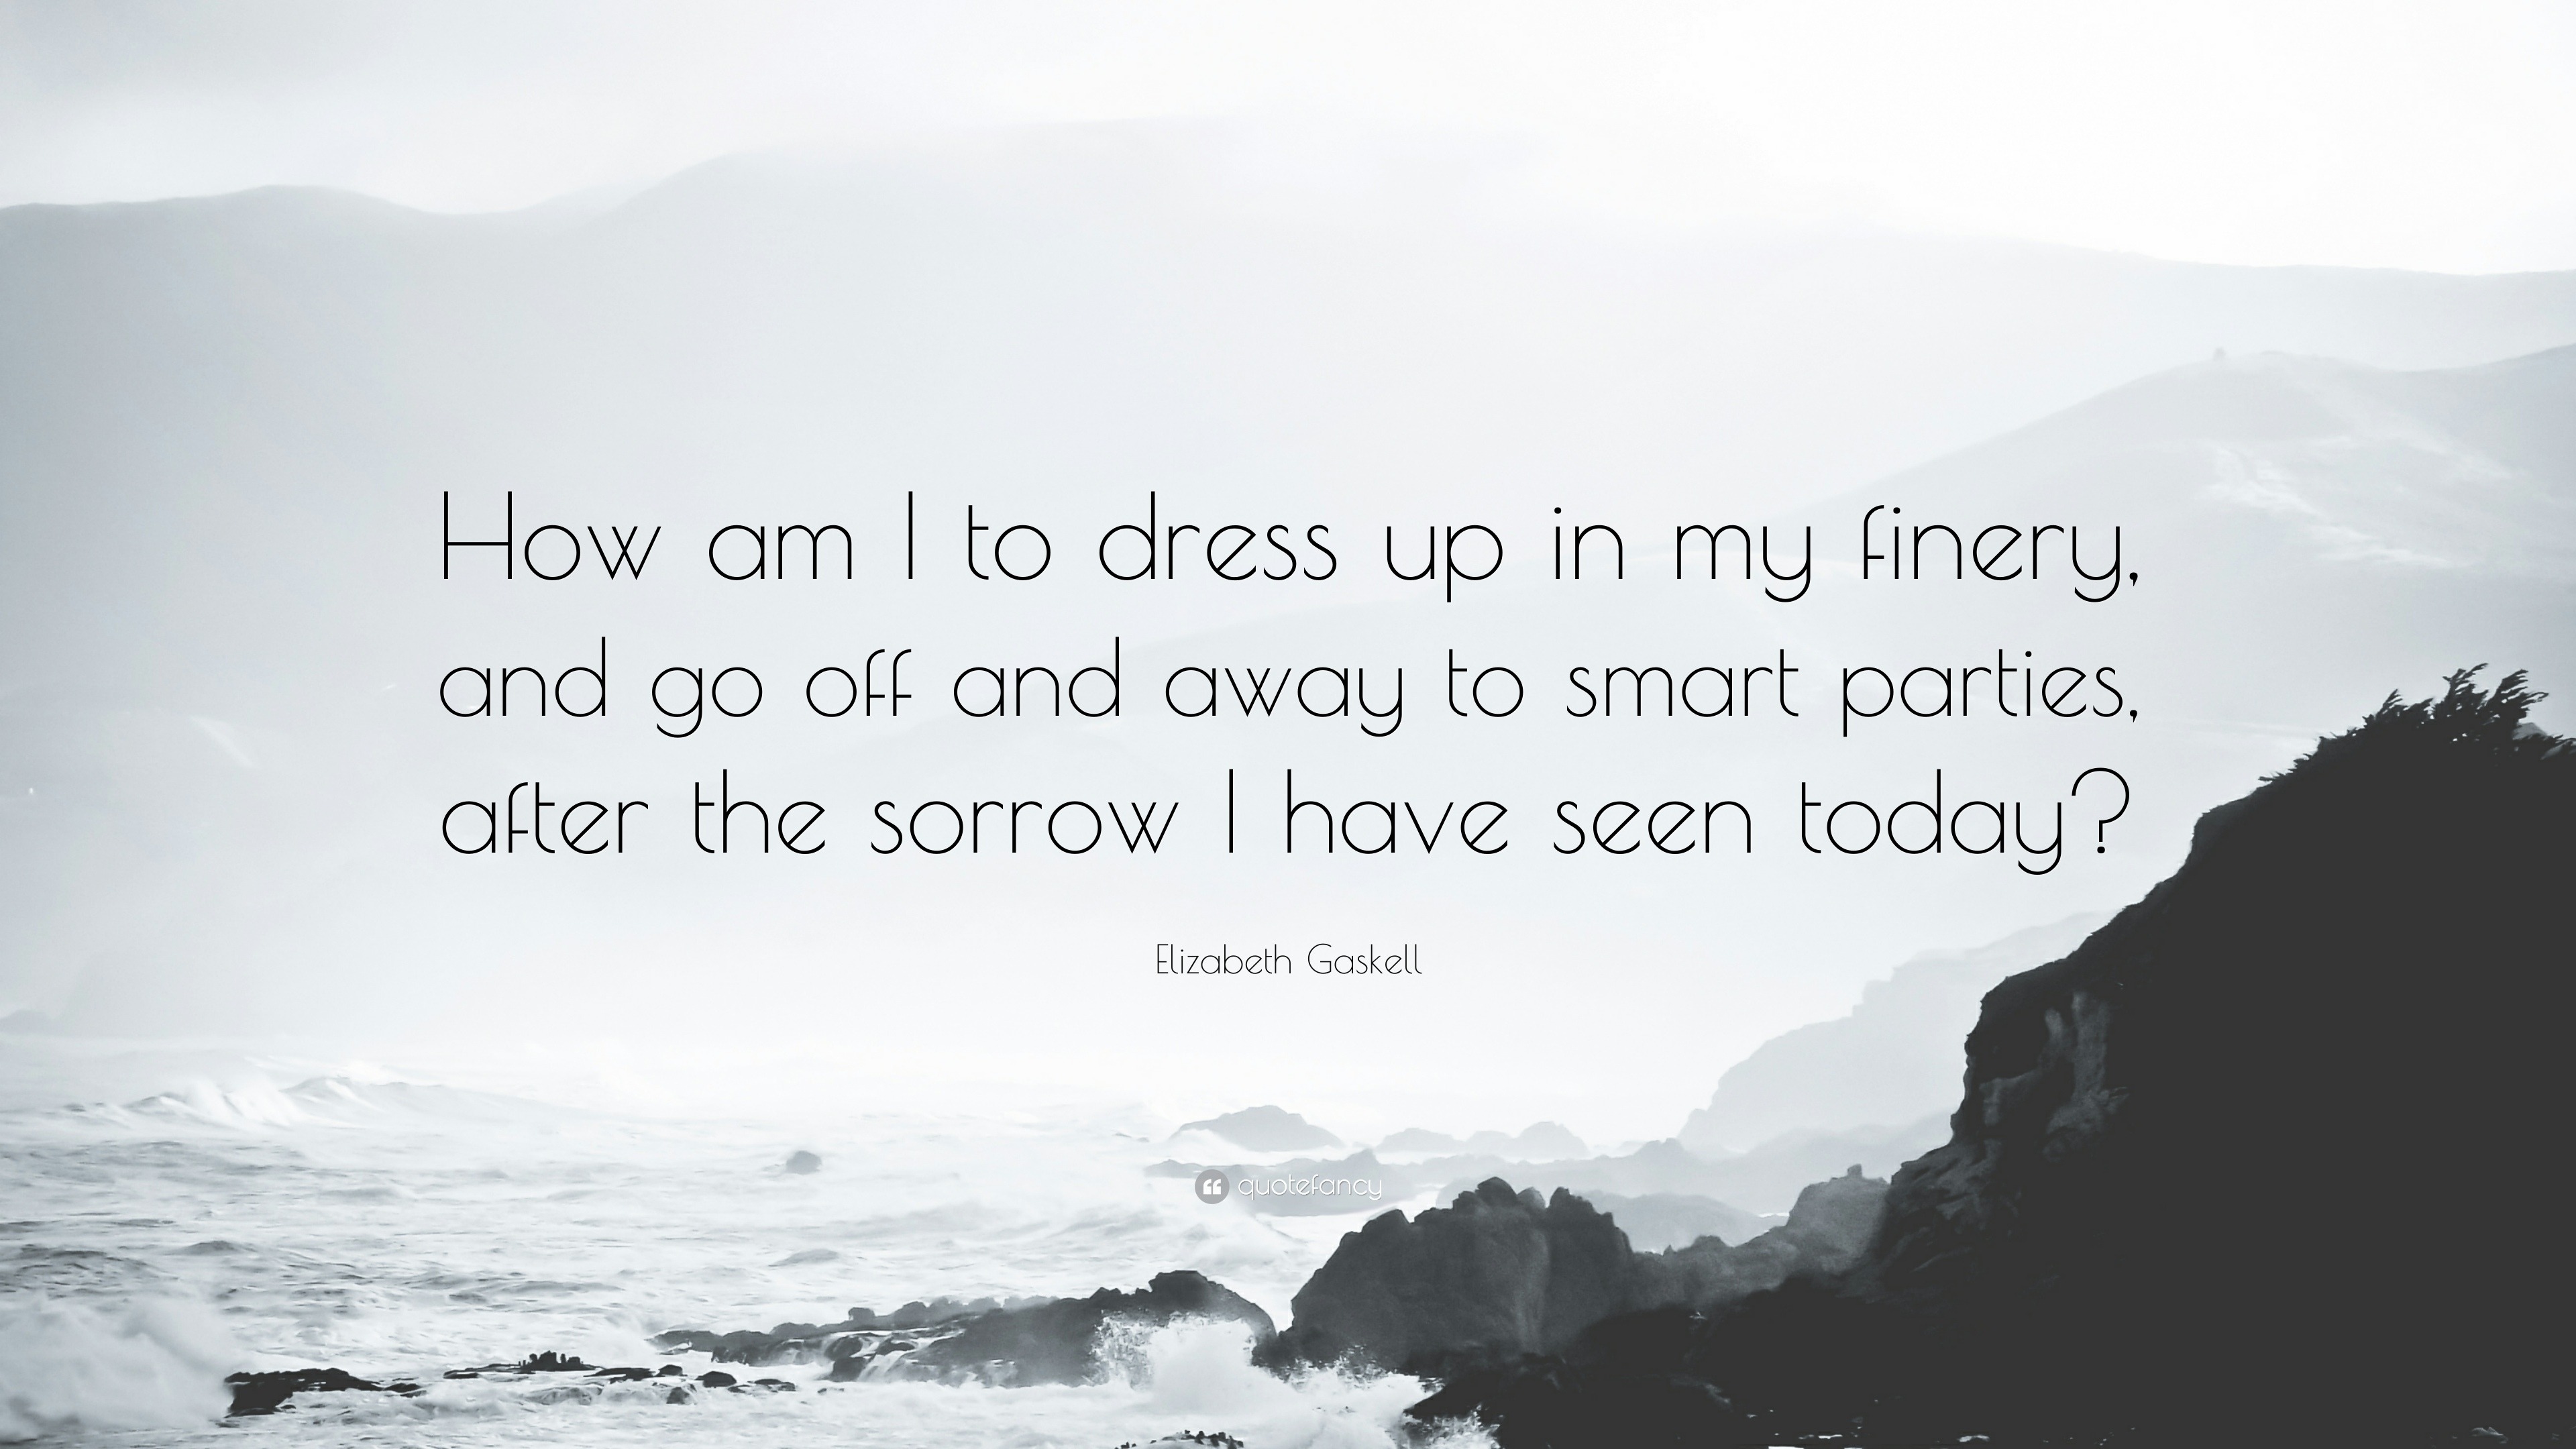 Elizabeth Gaskell Quote How Am I To Dress Up In My Finery And Go Off And Away To Smart Parties After The Sorrow I Have Seen Today 7 Wallpapers Quotefancy